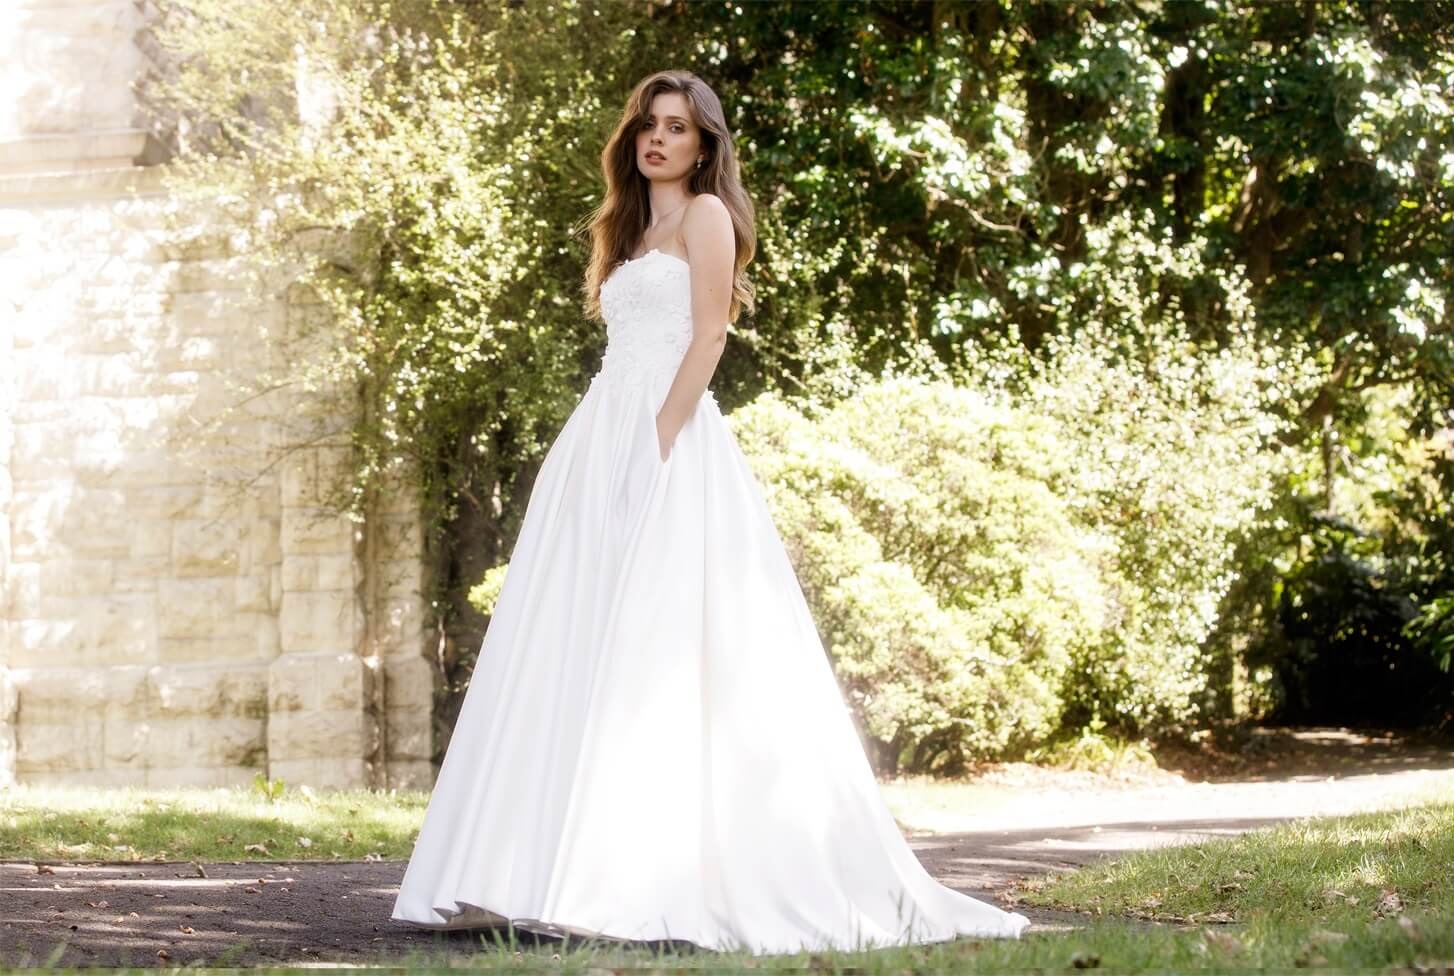 Classic A-line wedding dress with full satin skirt and blossom appliqued lace bodice.